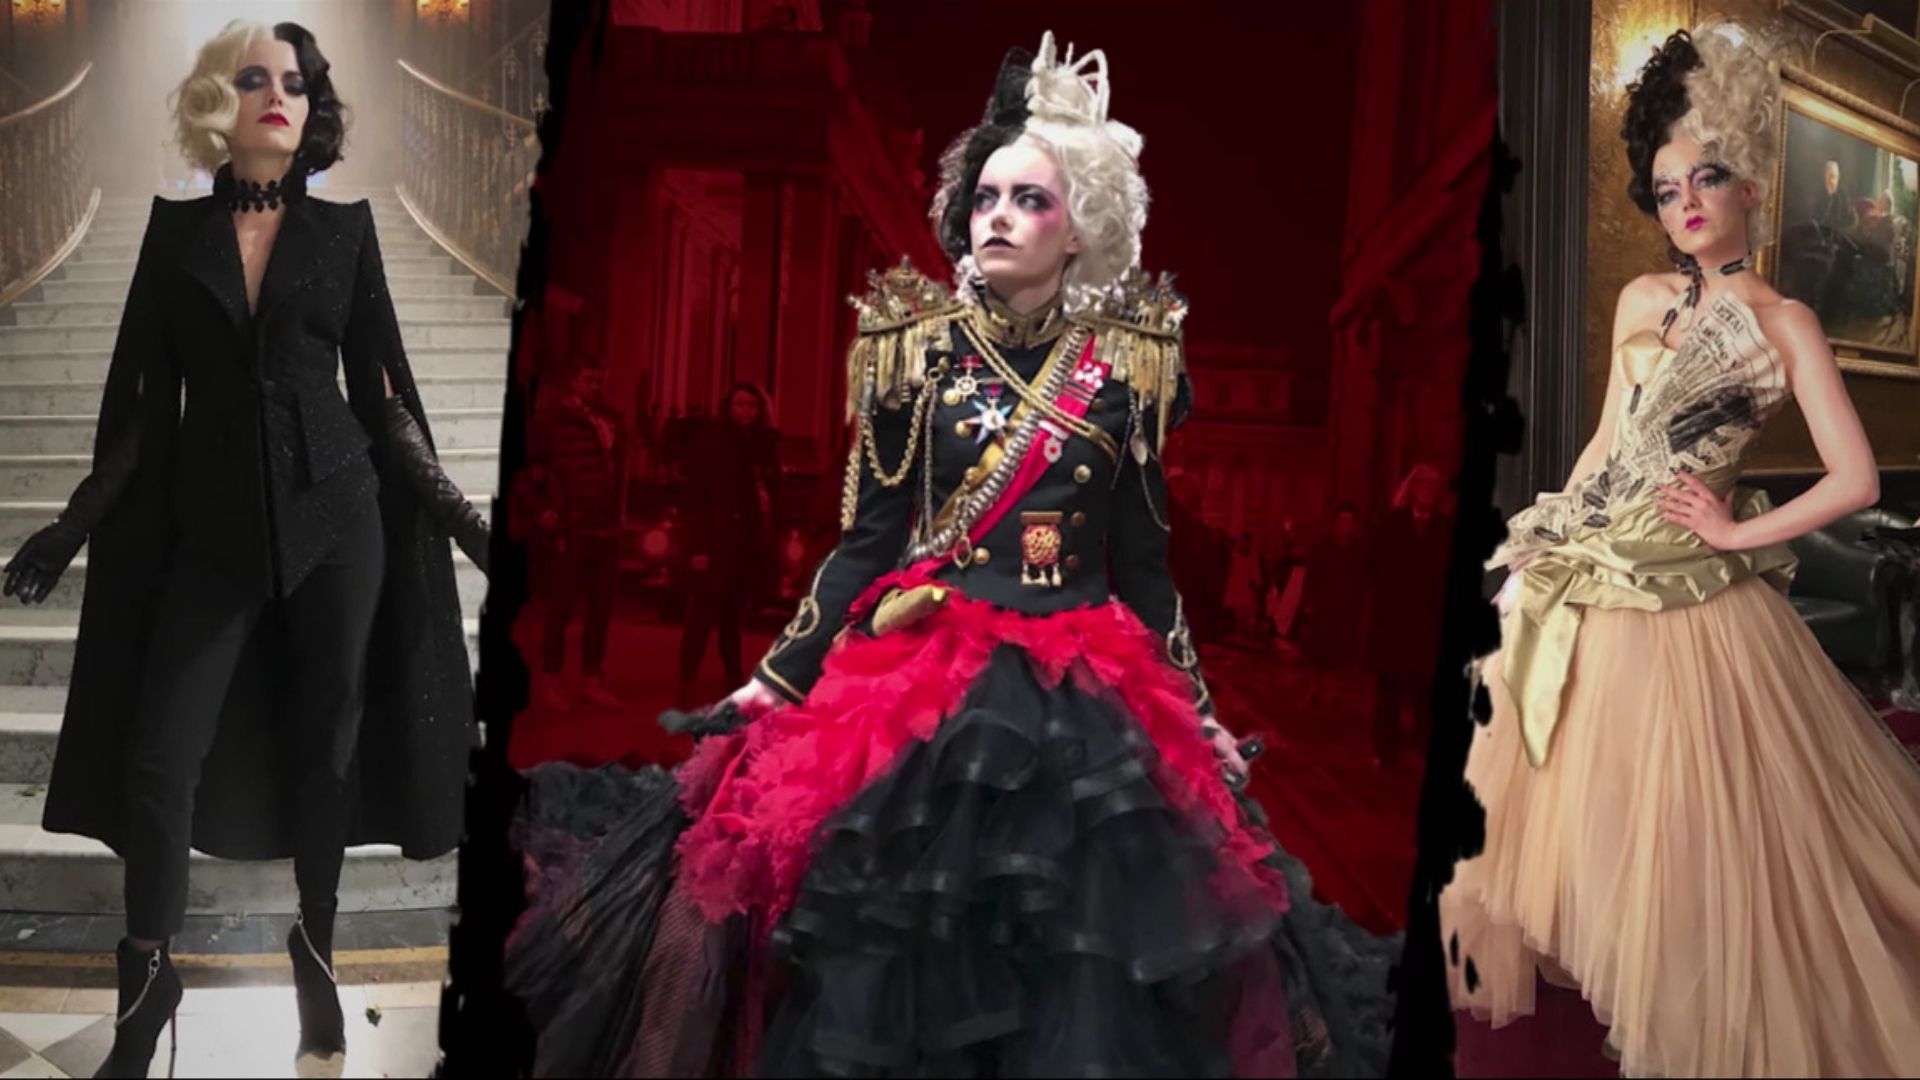 Congratulations to Jenny Beavan for her Academy Award nomination for Best Costume  Design for #Cruella! #OscarNoms